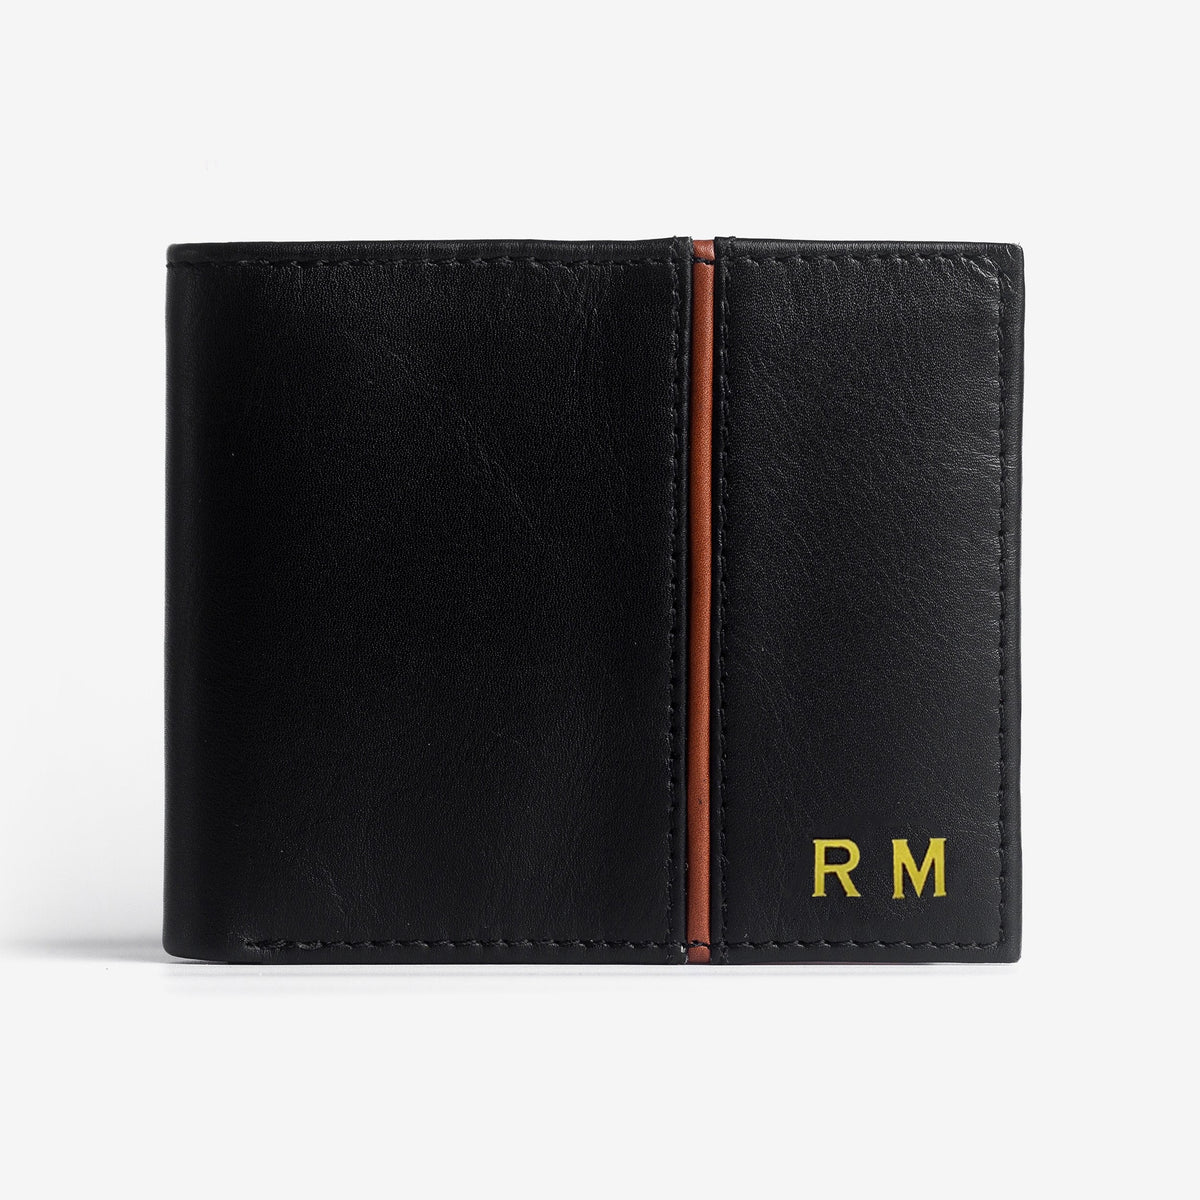 The Messy Corner Mens Wallet Personalized Leather Men's Wallet - Black